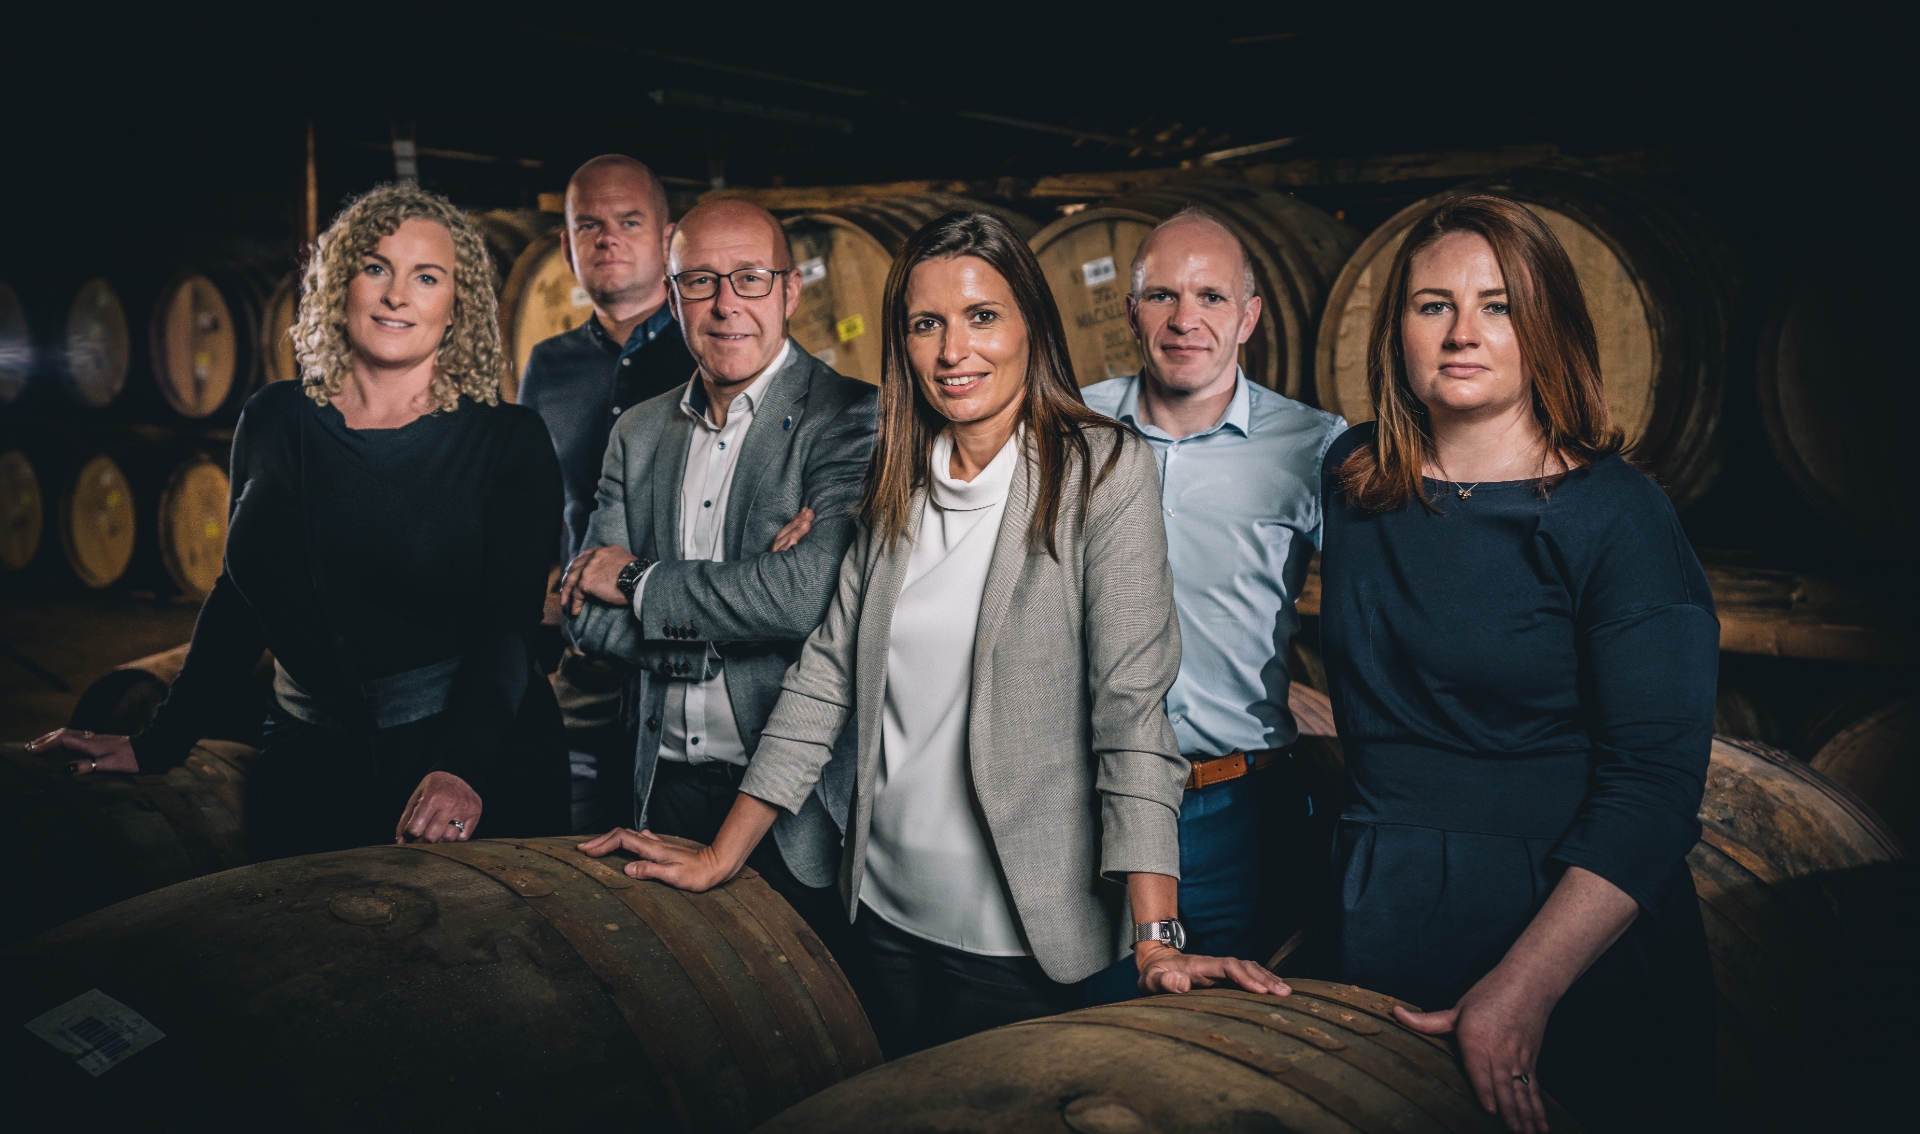 The Macallan Whisky Mastery Team, led by Master Whisky Maker Kirsteen Campbell, sees maturation and whisky-making working hand-in-hand to bring out the best in the spirit and wood